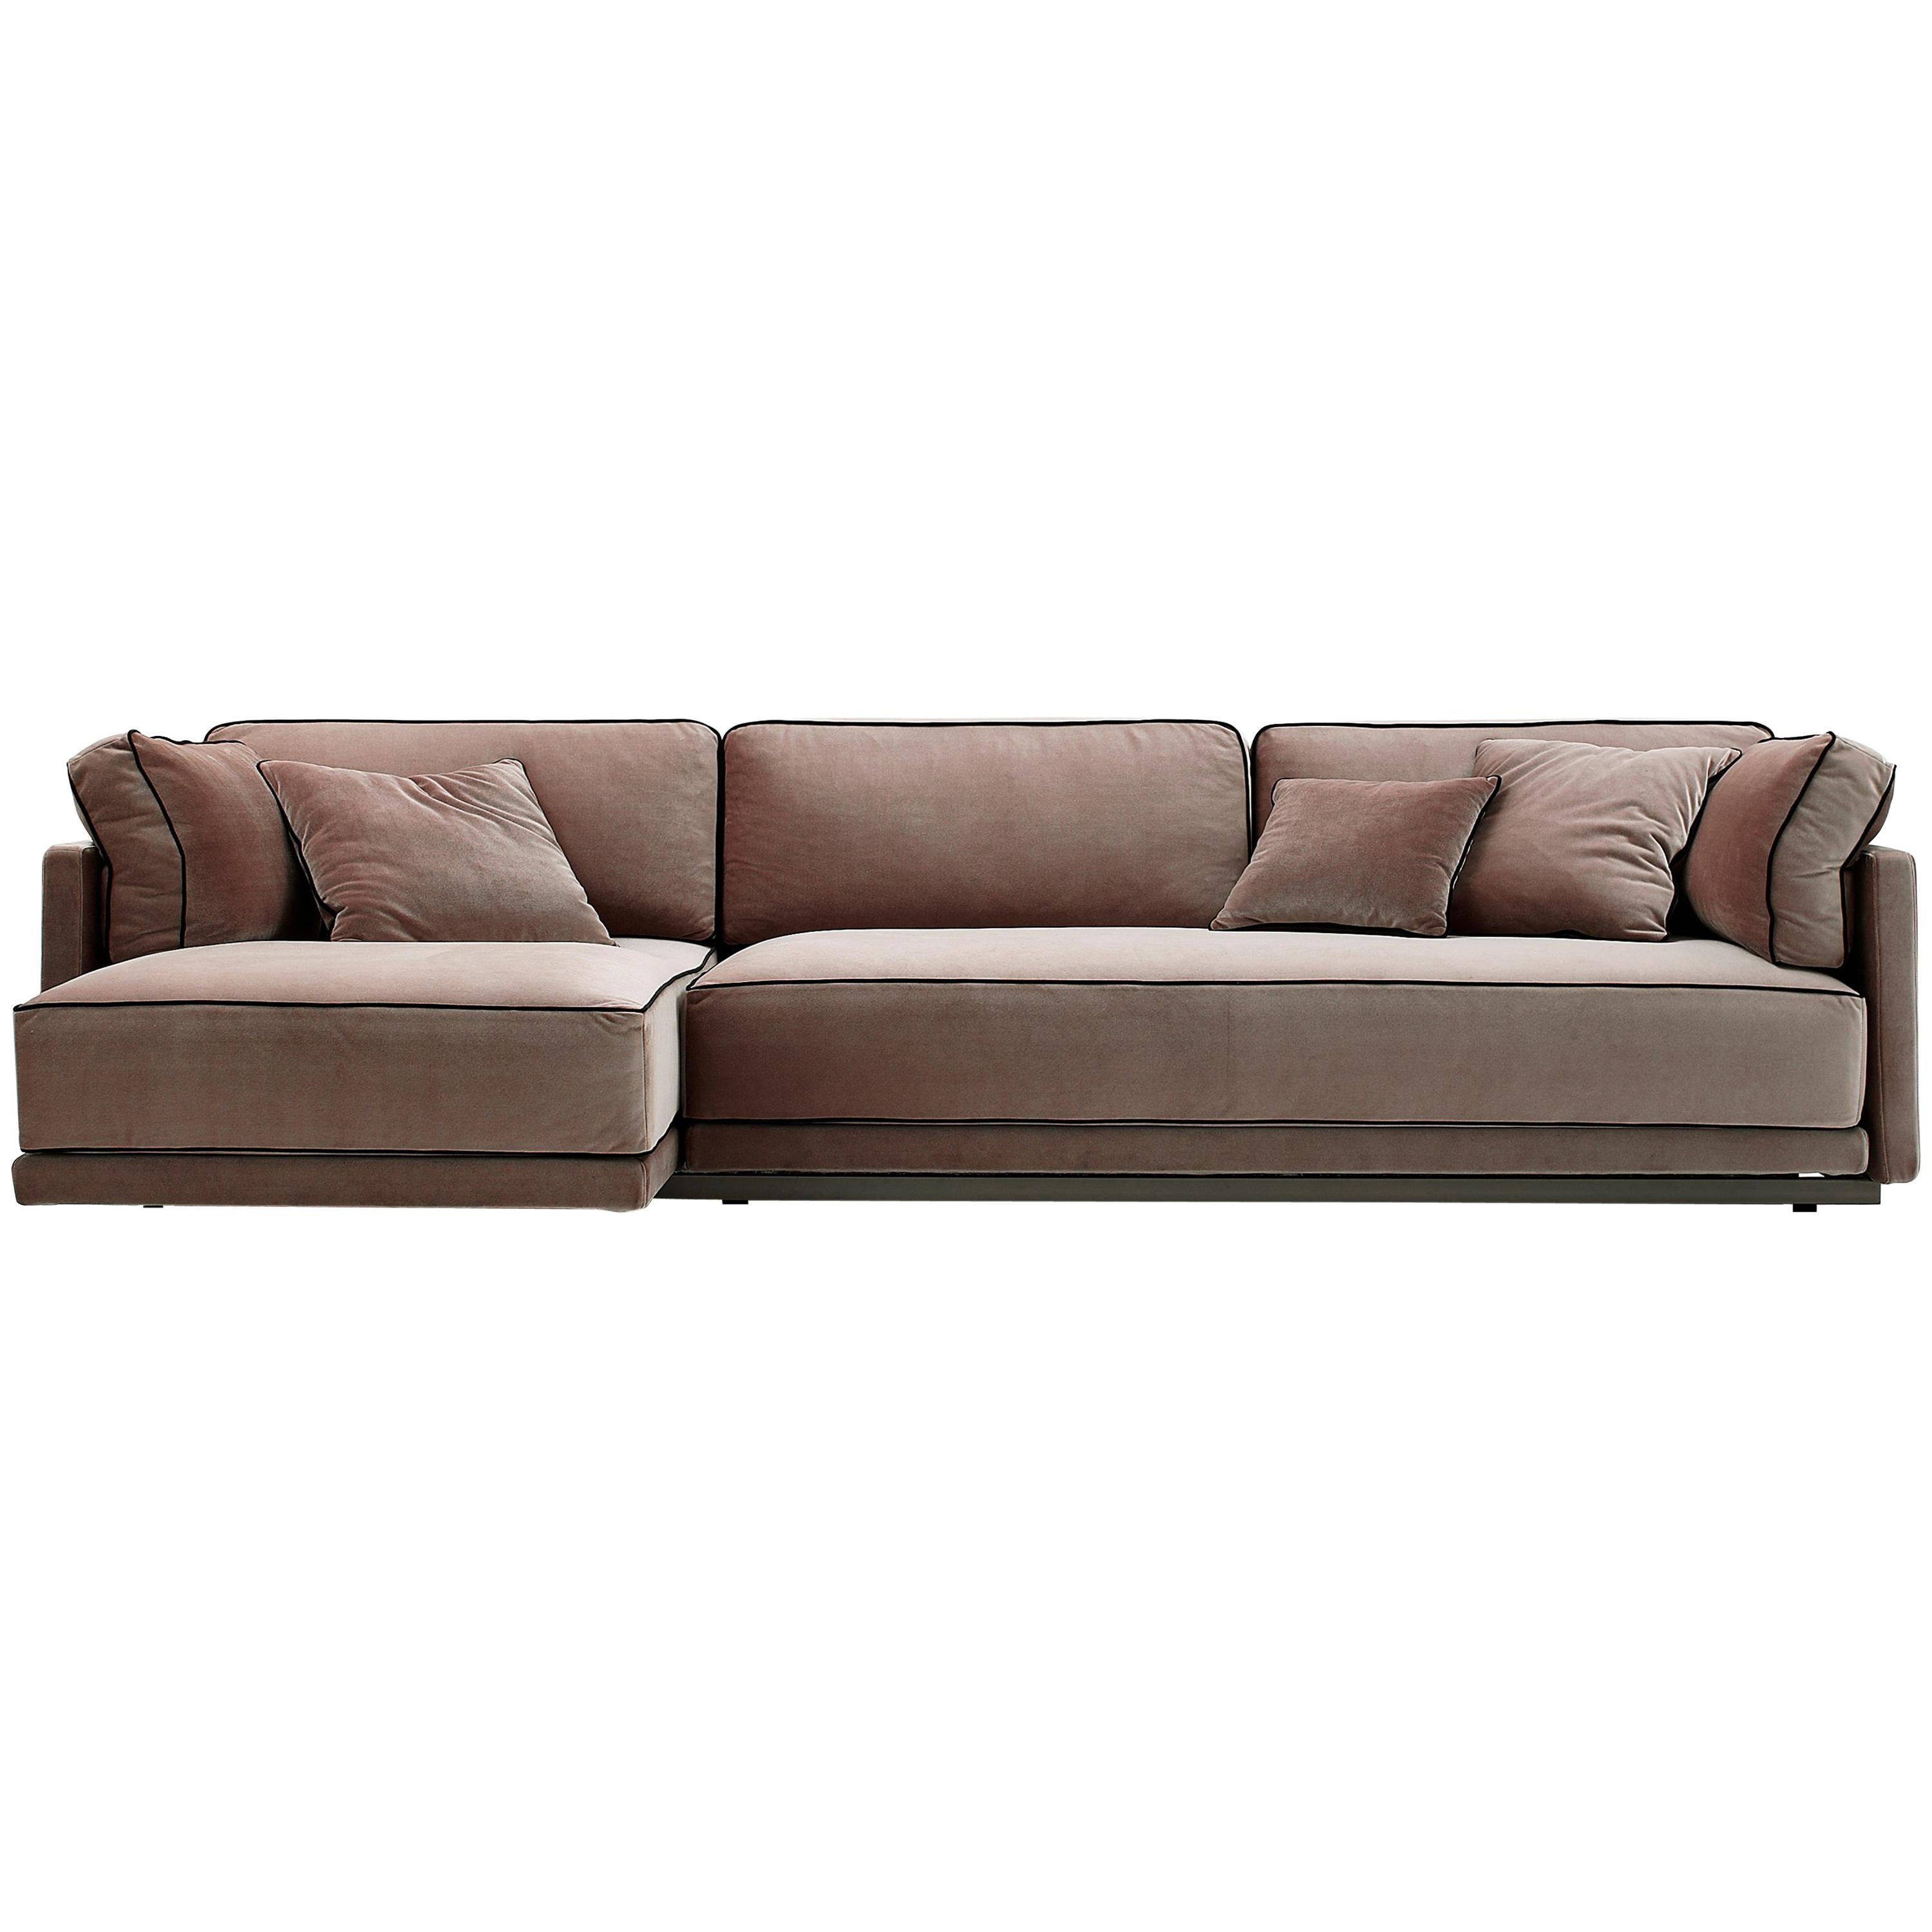 Nube Italia Avenue Sofa in Brown Fabric with Black Trimmings by Marco Corti For Sale